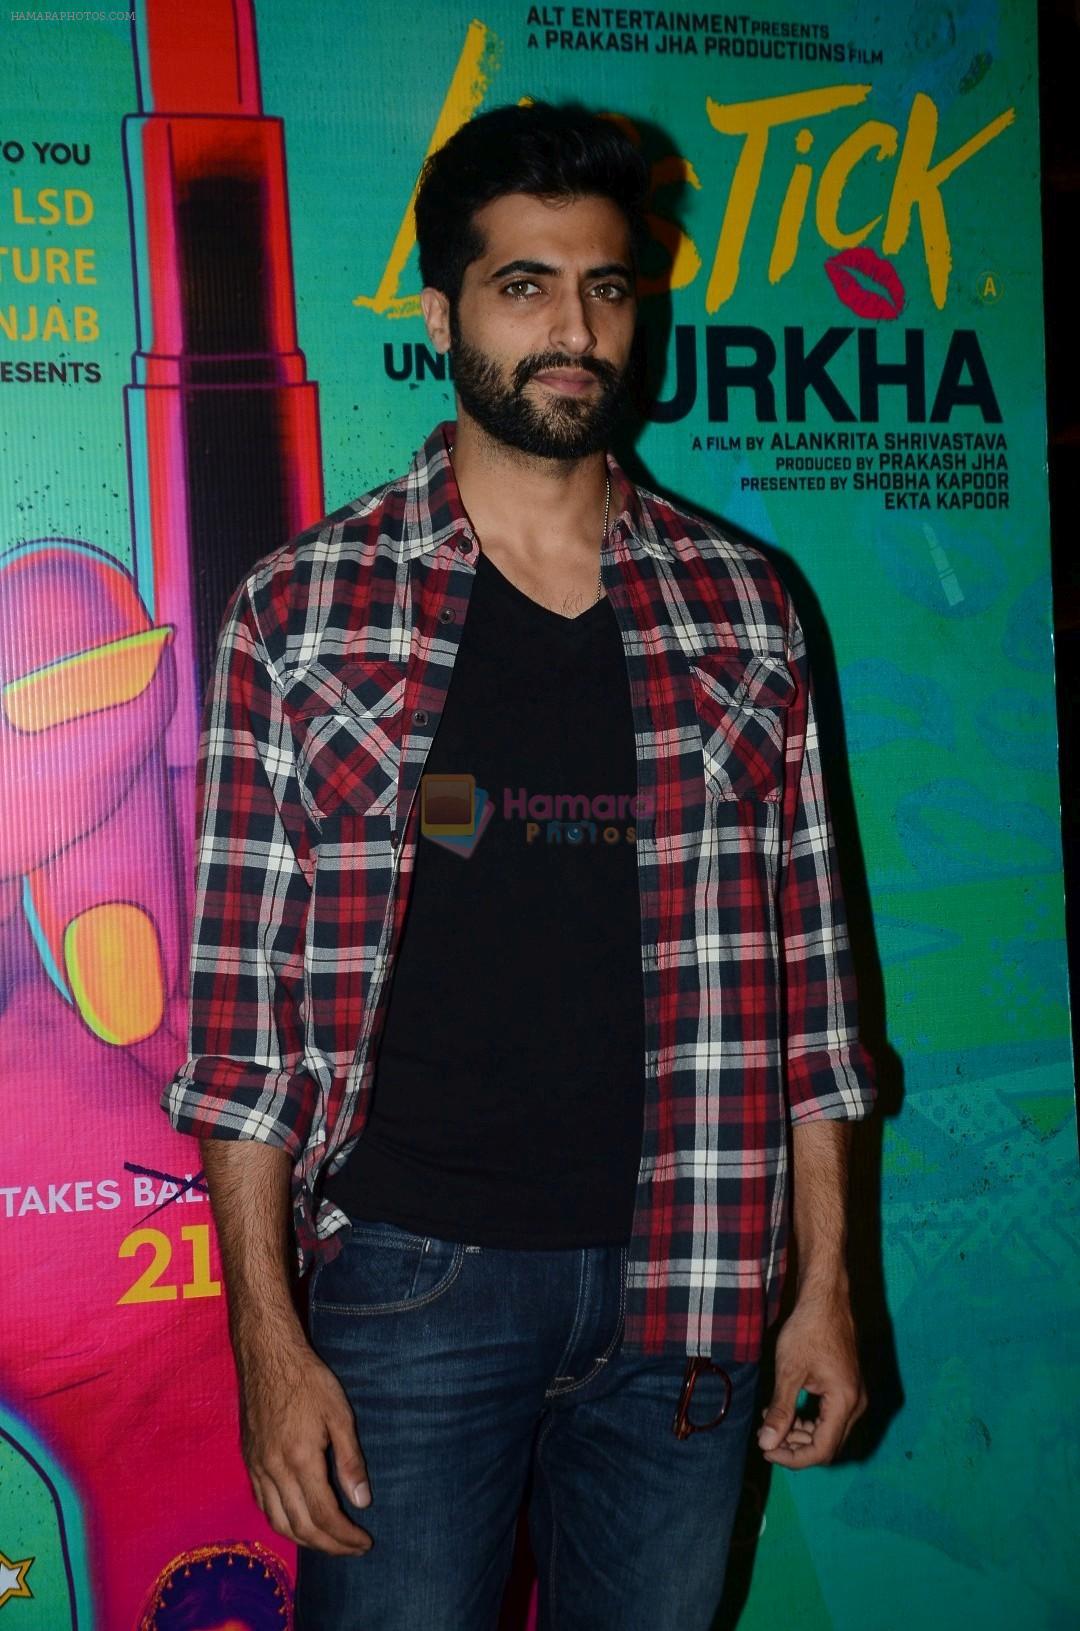 at the Special Screening Of Film Lipstick Under My Burkha on 18th July 2017